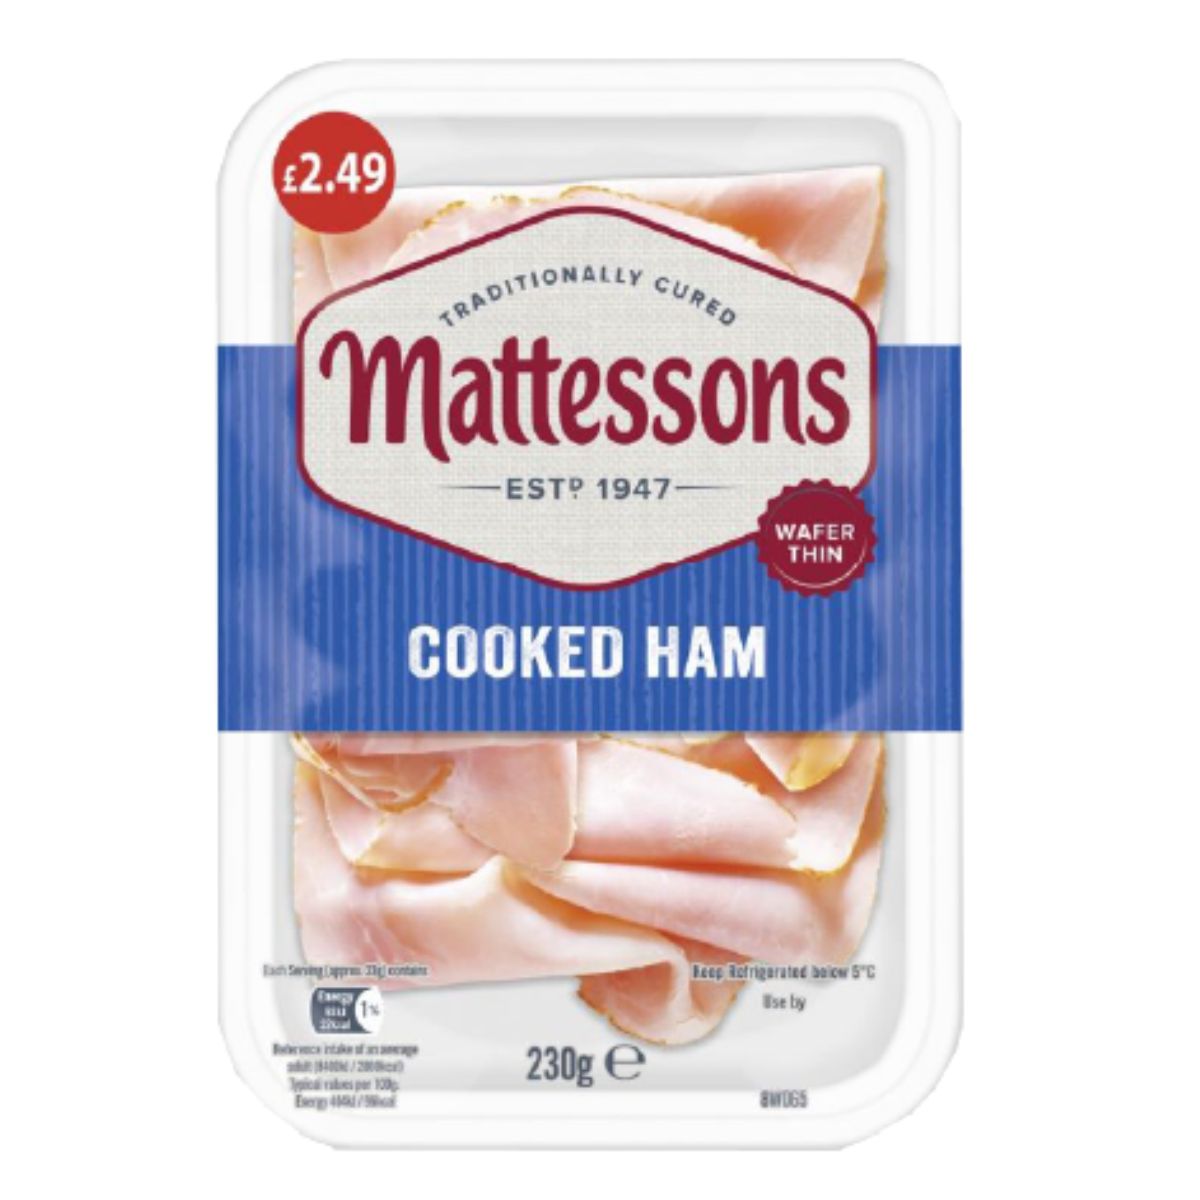 Packaged Mattessons Wafer Thin Cooked Ham with a price label, sealed in a plastic tray.